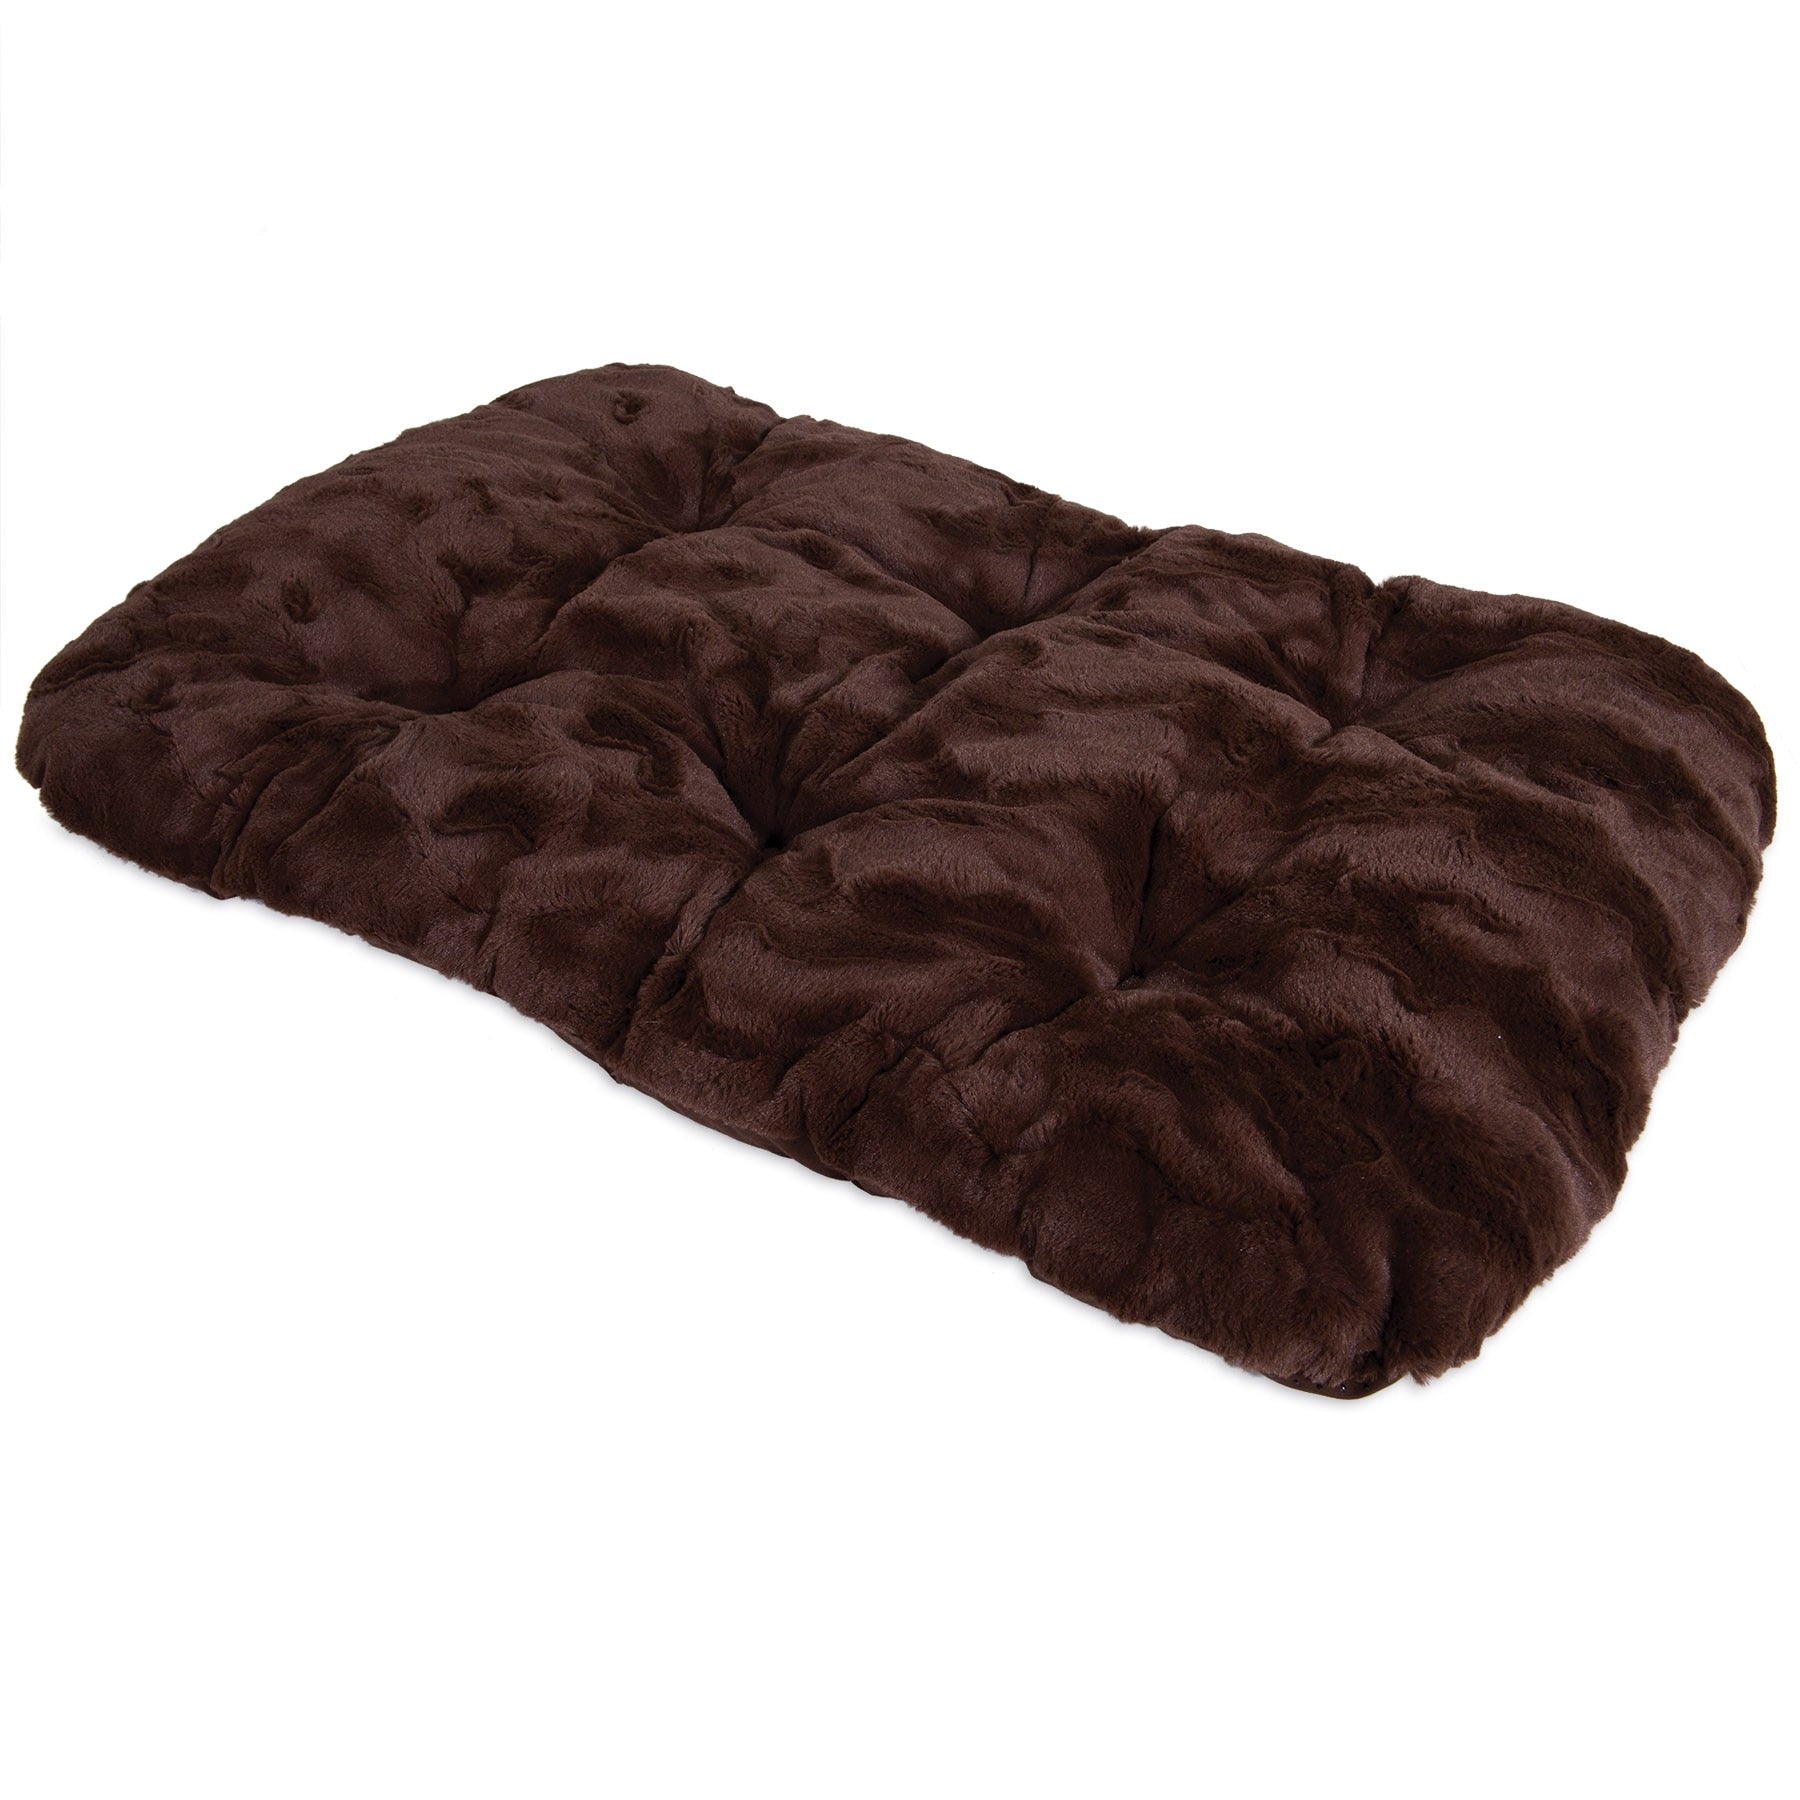 SnooZZy Cozy Comforter Kennel Mat - Brown